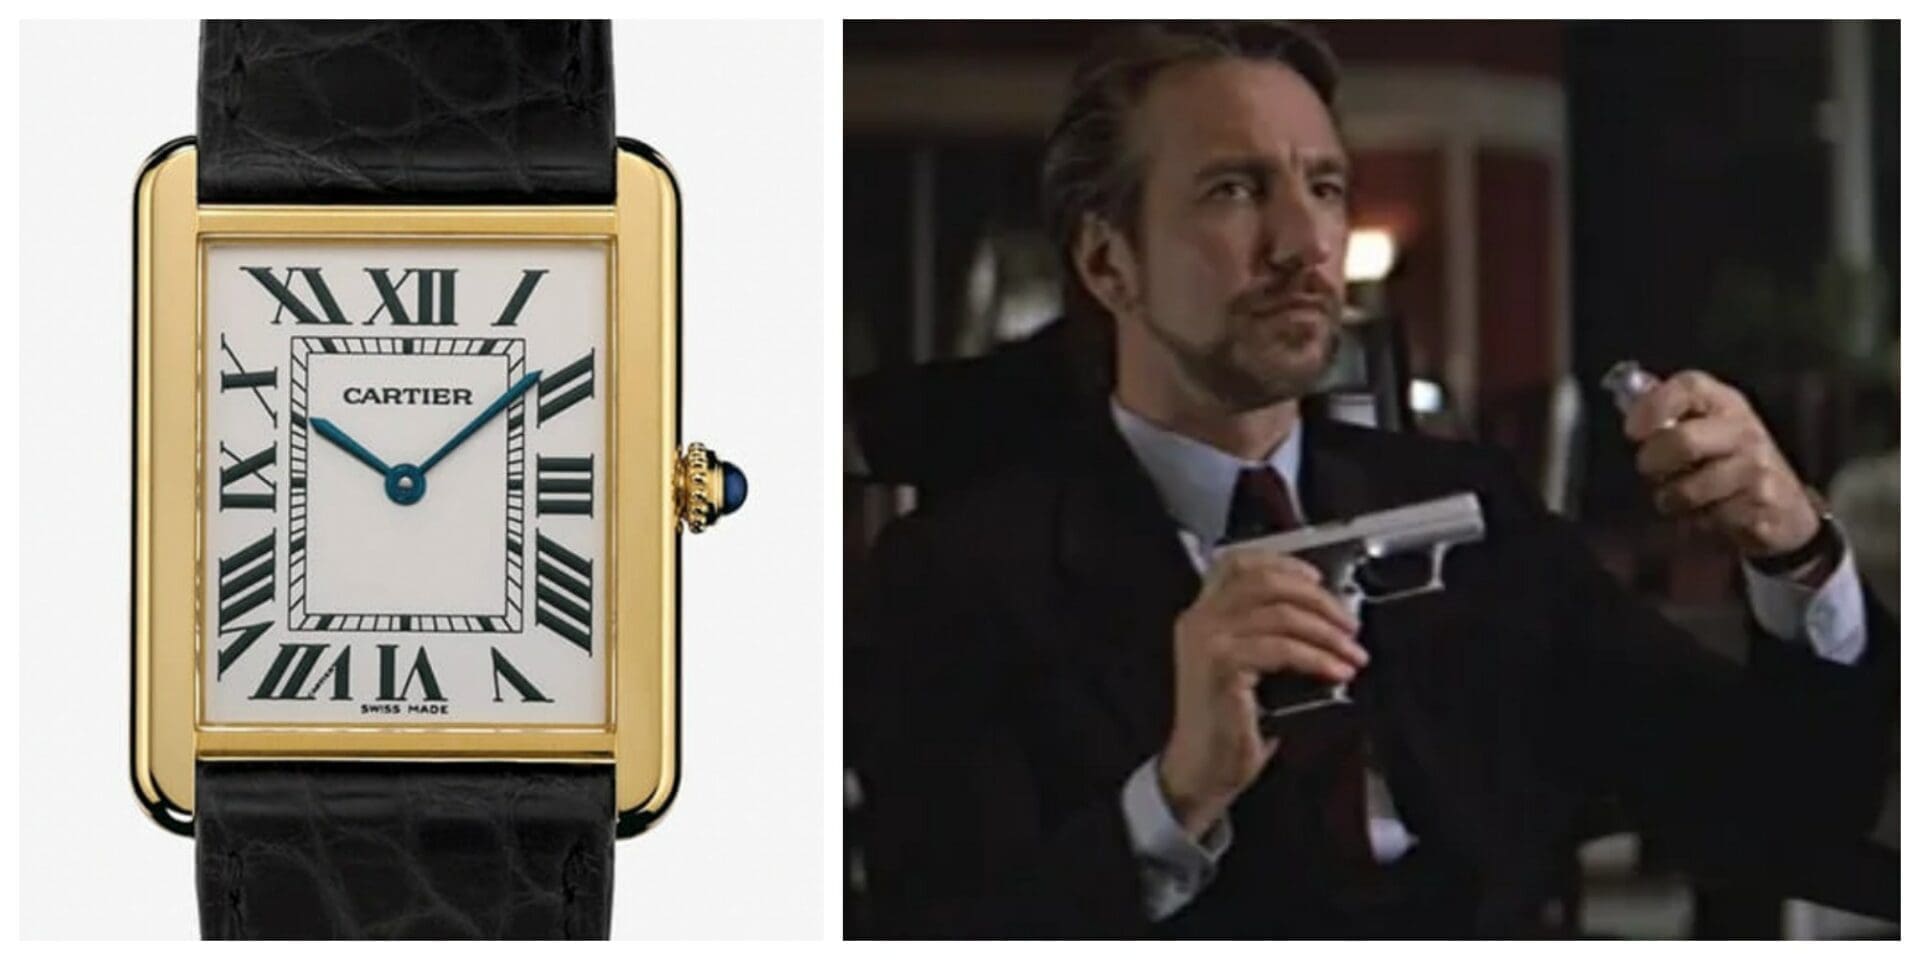 Hans Gruber in Die Hard wears a Cartier Tank better than anyone else